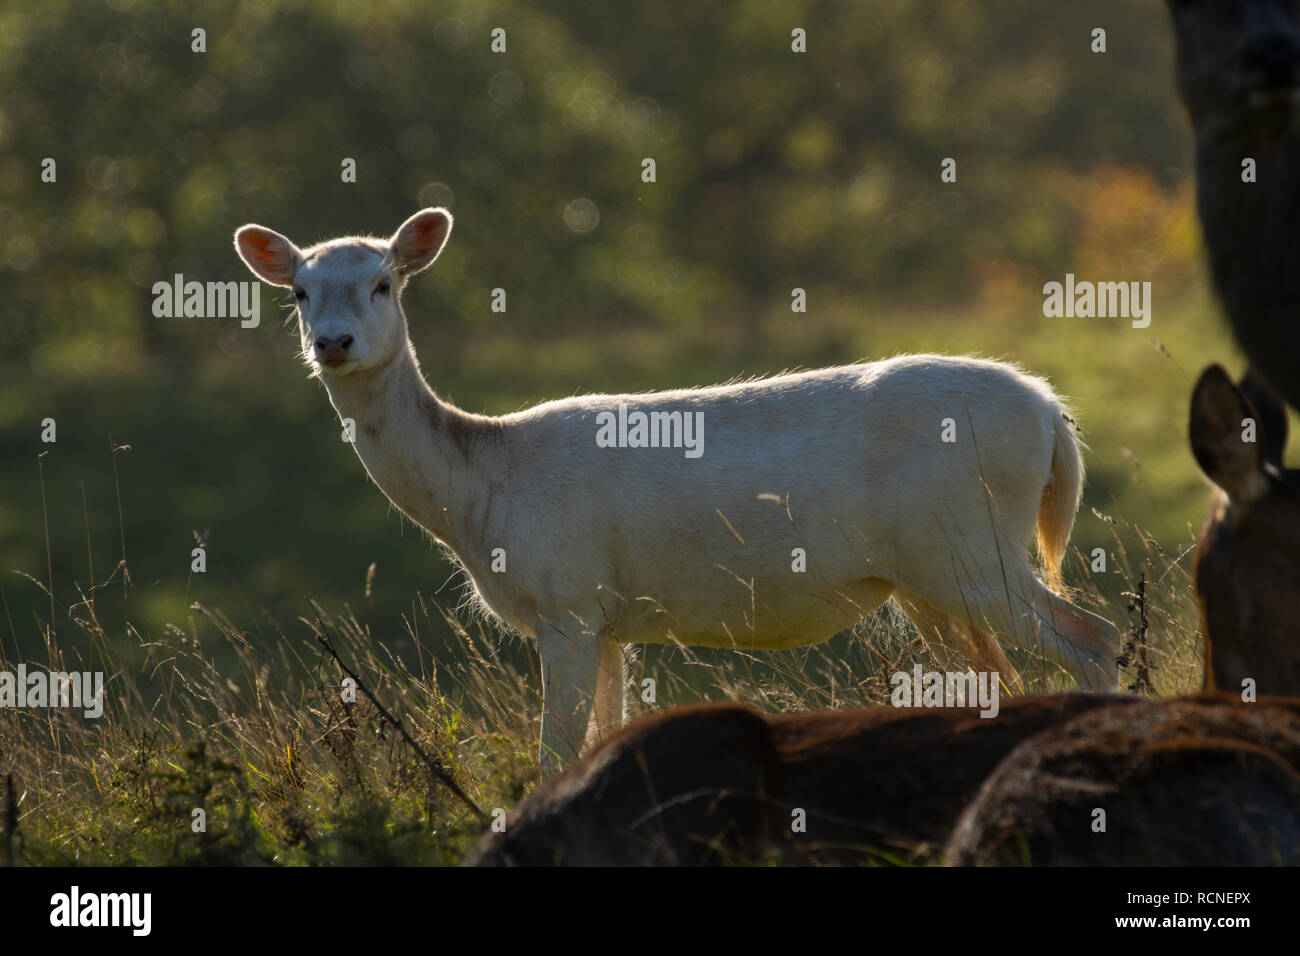 Rare young White Tailed Deer stood in long grass, Studley Royal Deer Park, Ripon, North Yorkshire, England, UK. Stock Photo